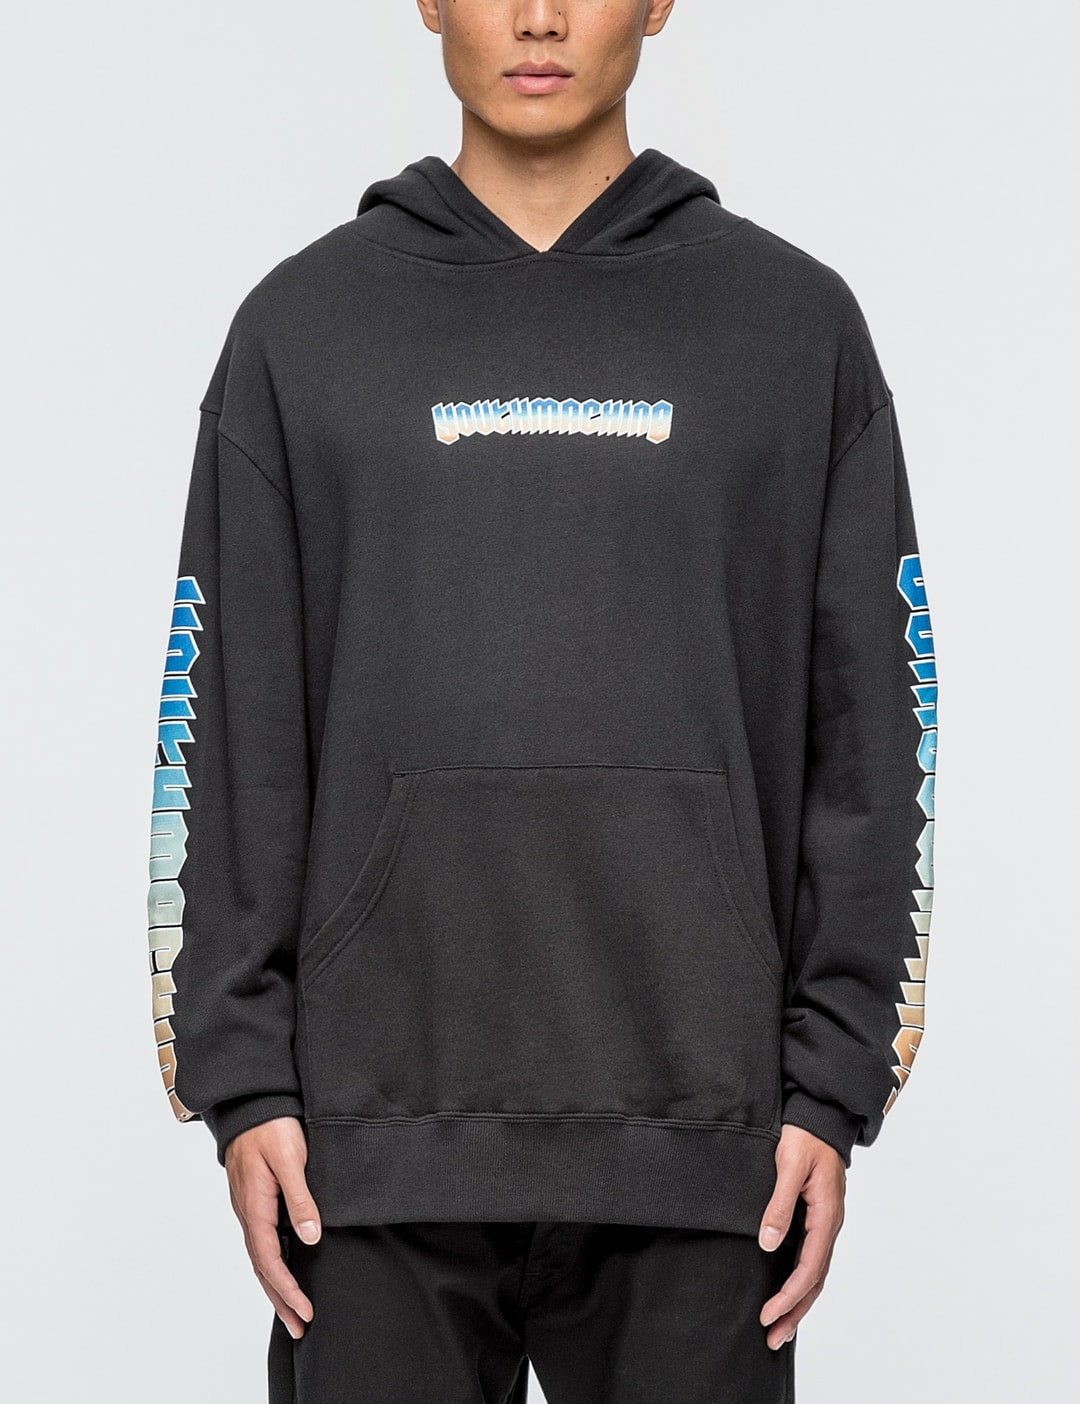 Youth Machine - Zion Hoodie | HBX - Globally Curated Fashion and ...